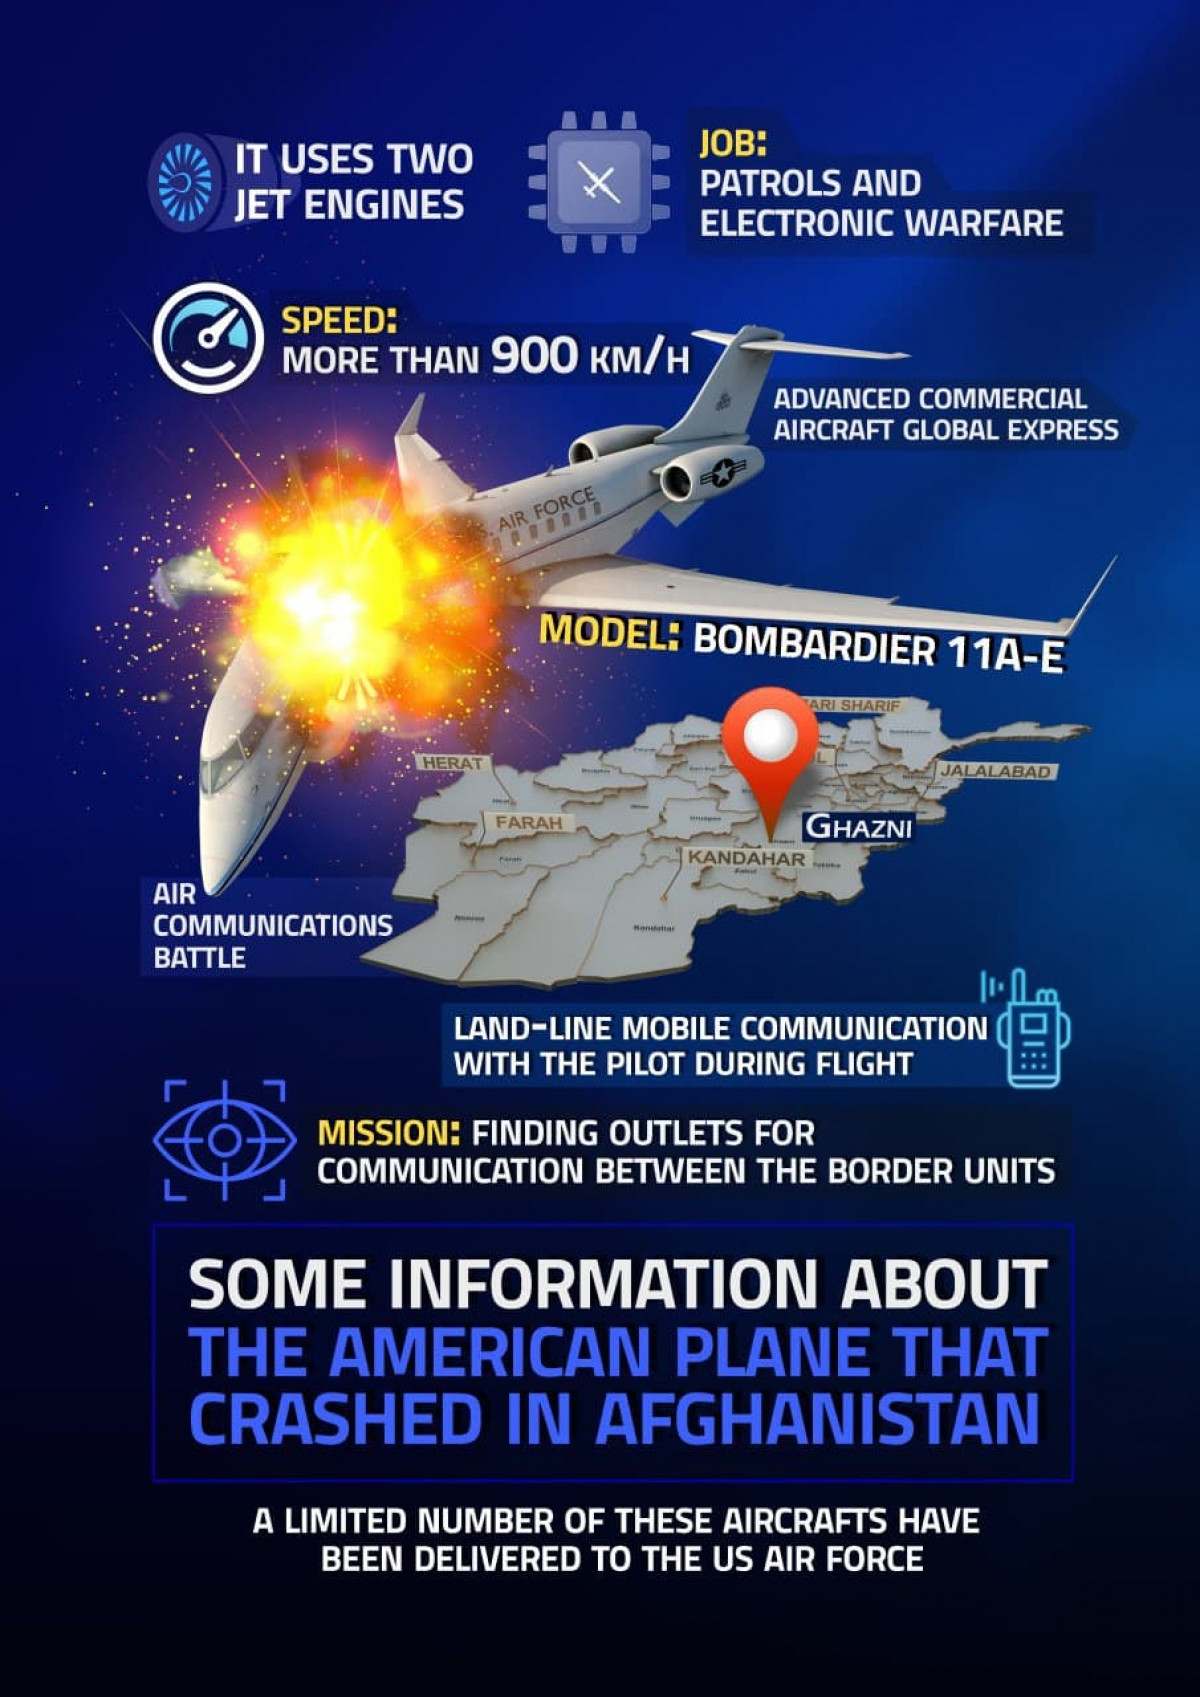 SOME INFORMATION ABOUT THE AMERICAN PLANE THAT CRASHED IN AFGHANISTAN